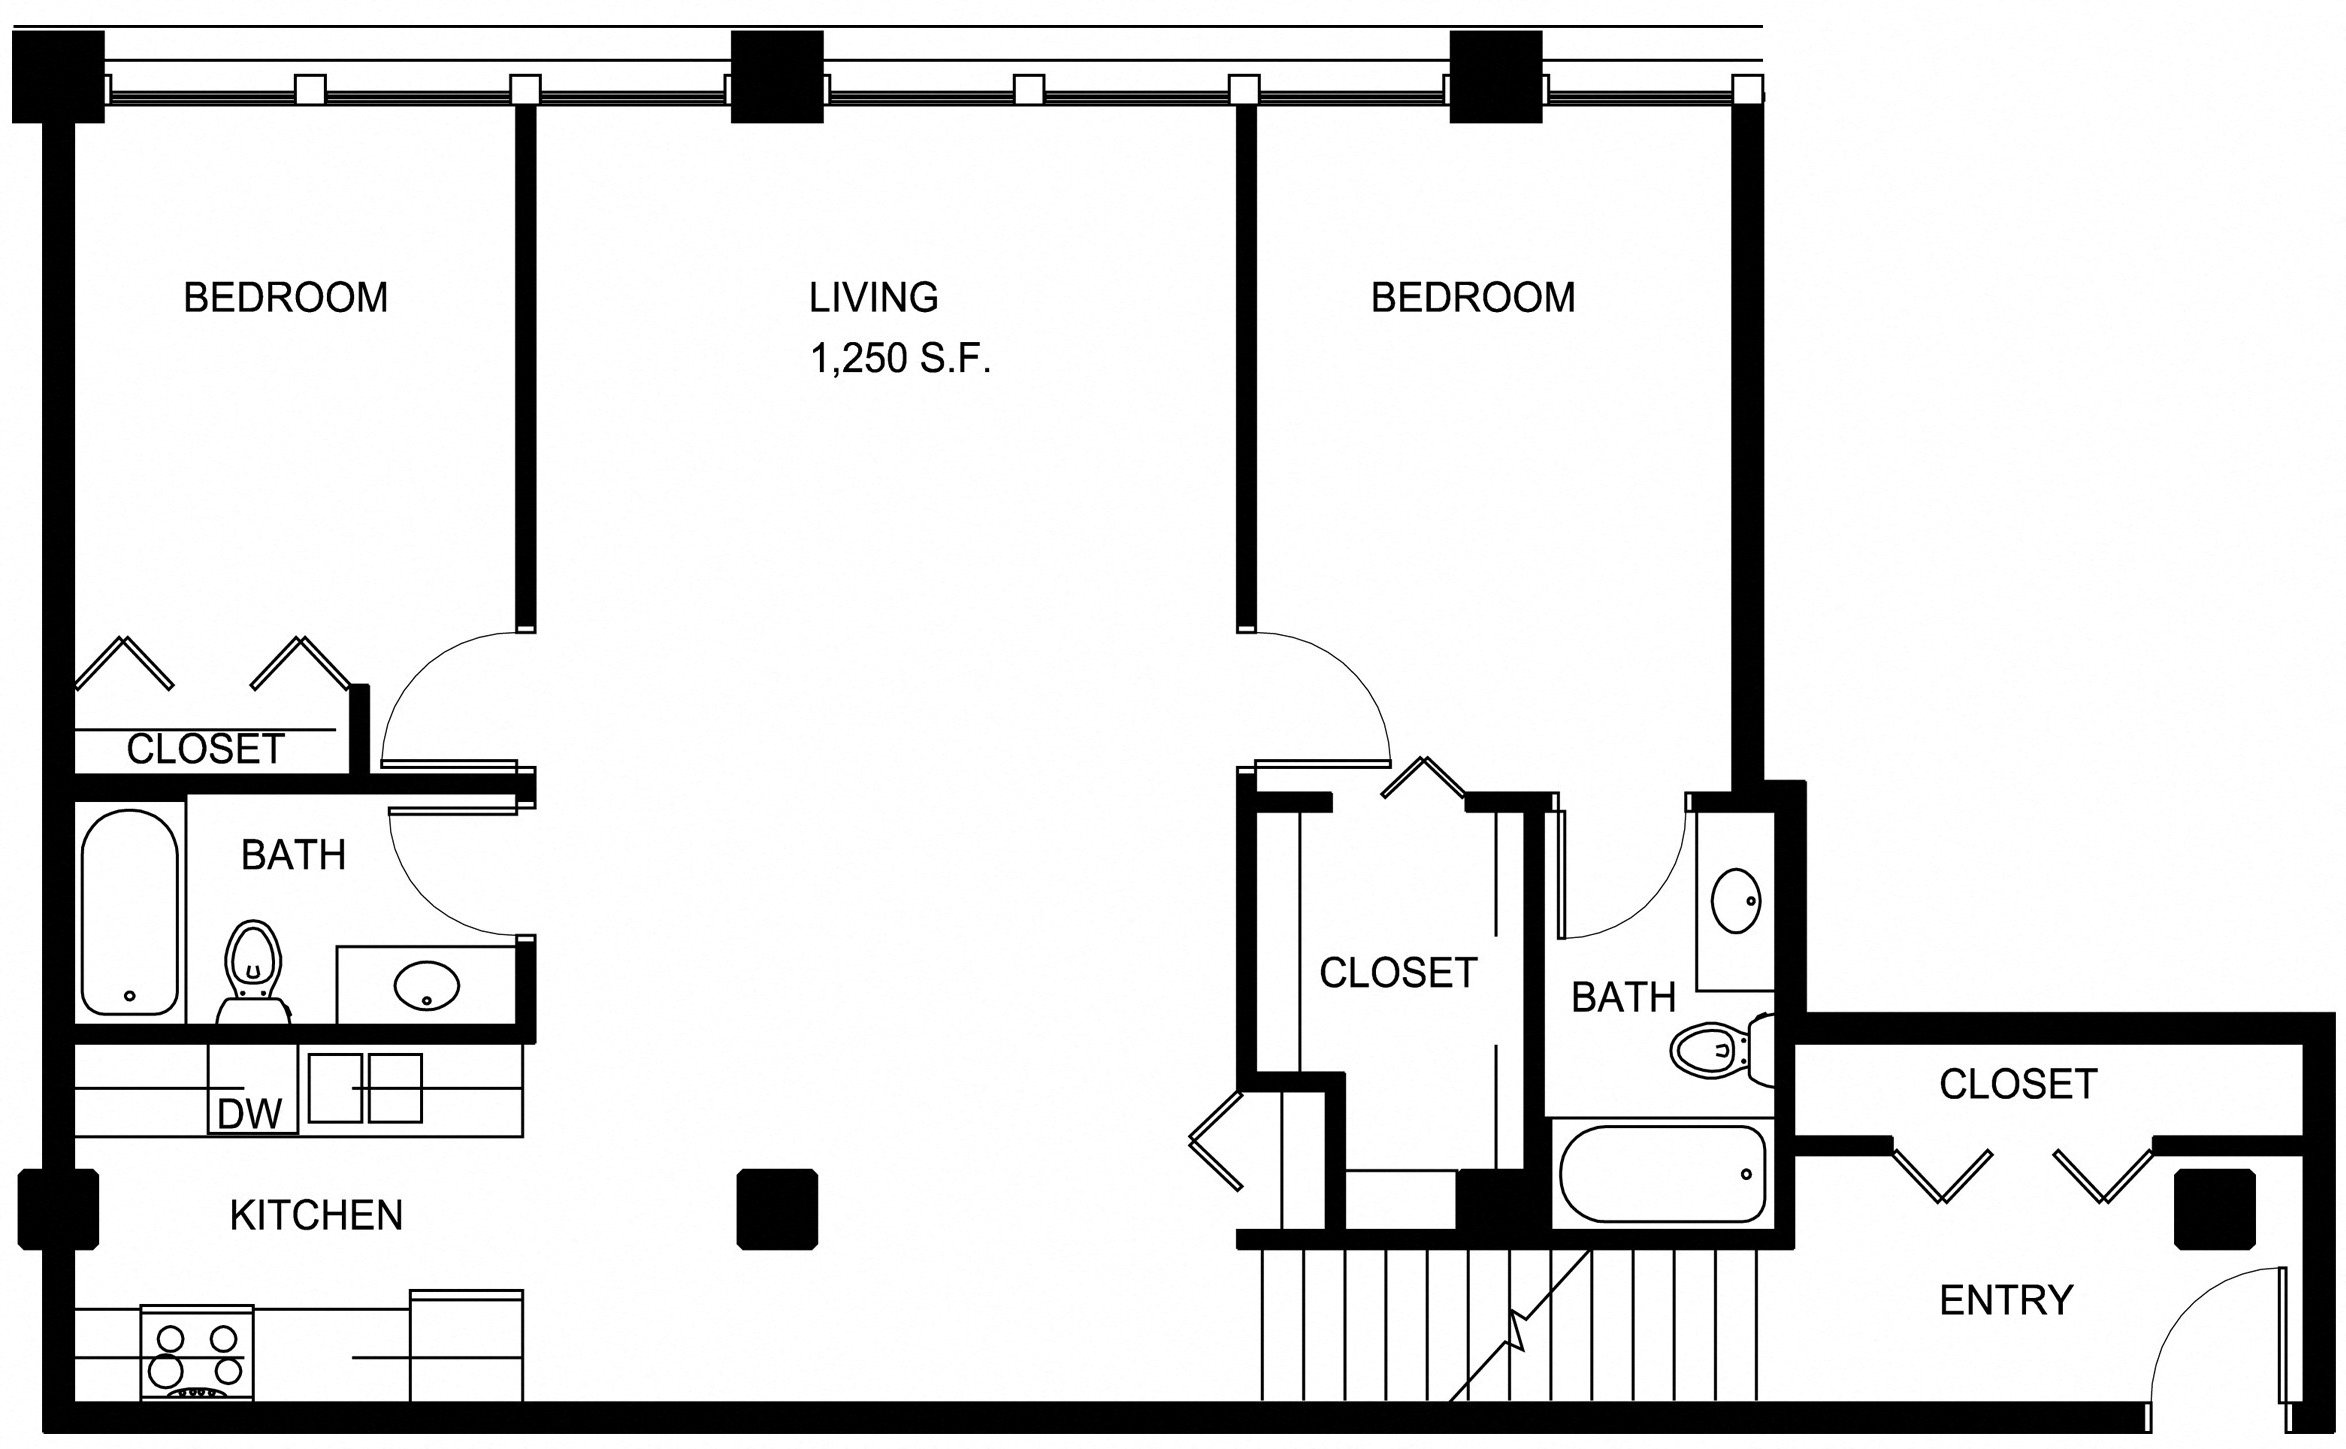 Floorplan for Apartment #P135, 2 bedroom unit at Halstead Providence